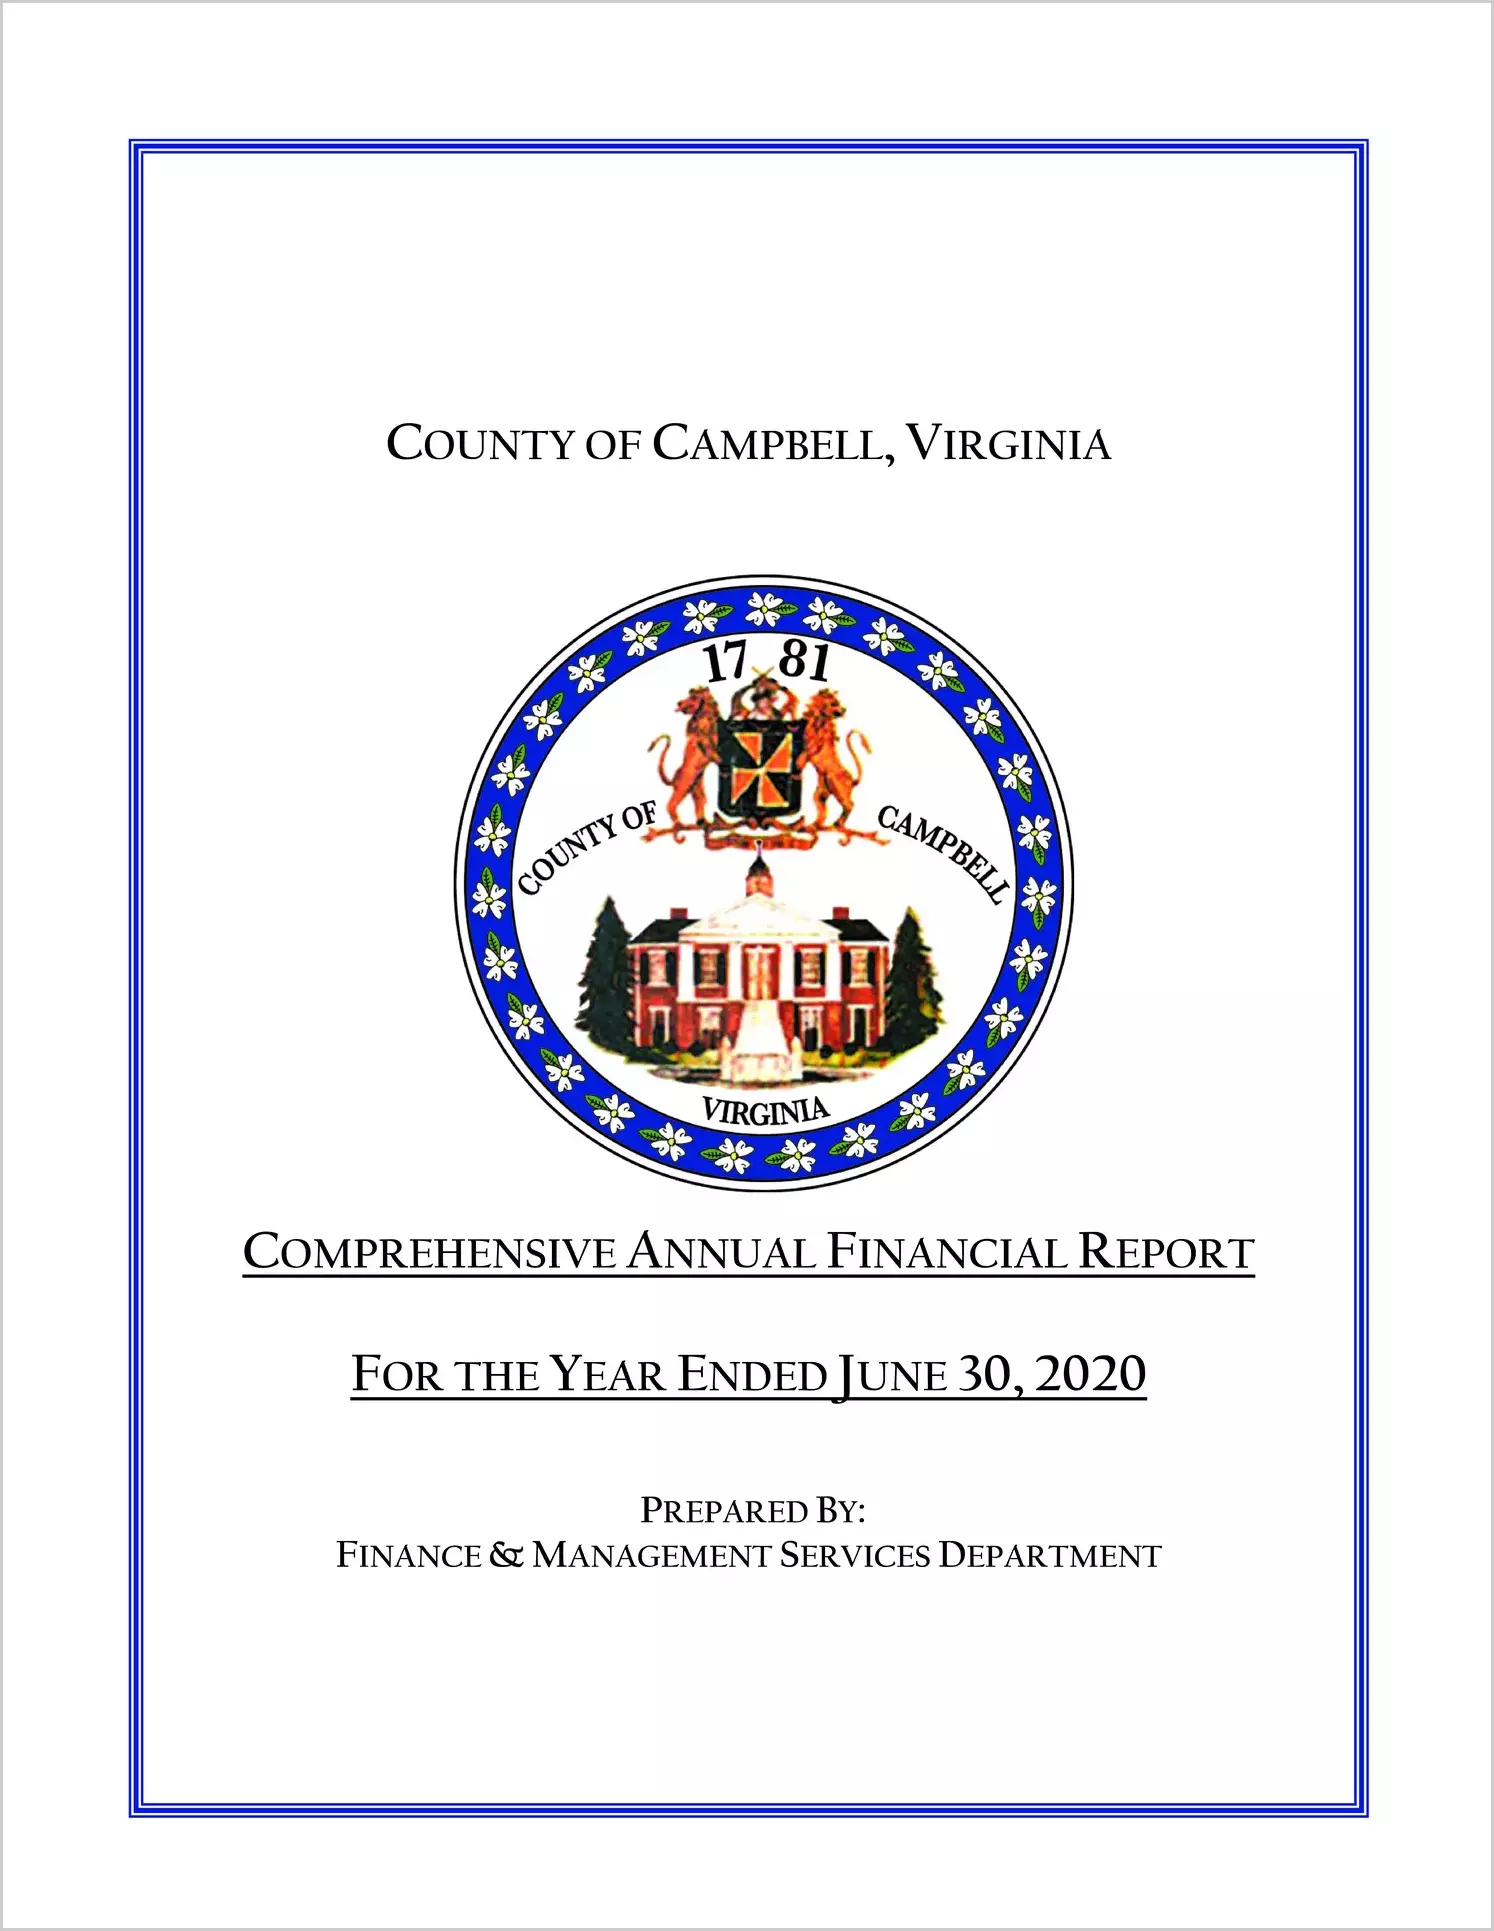 2020 Annual Financial Report for County of Campbell